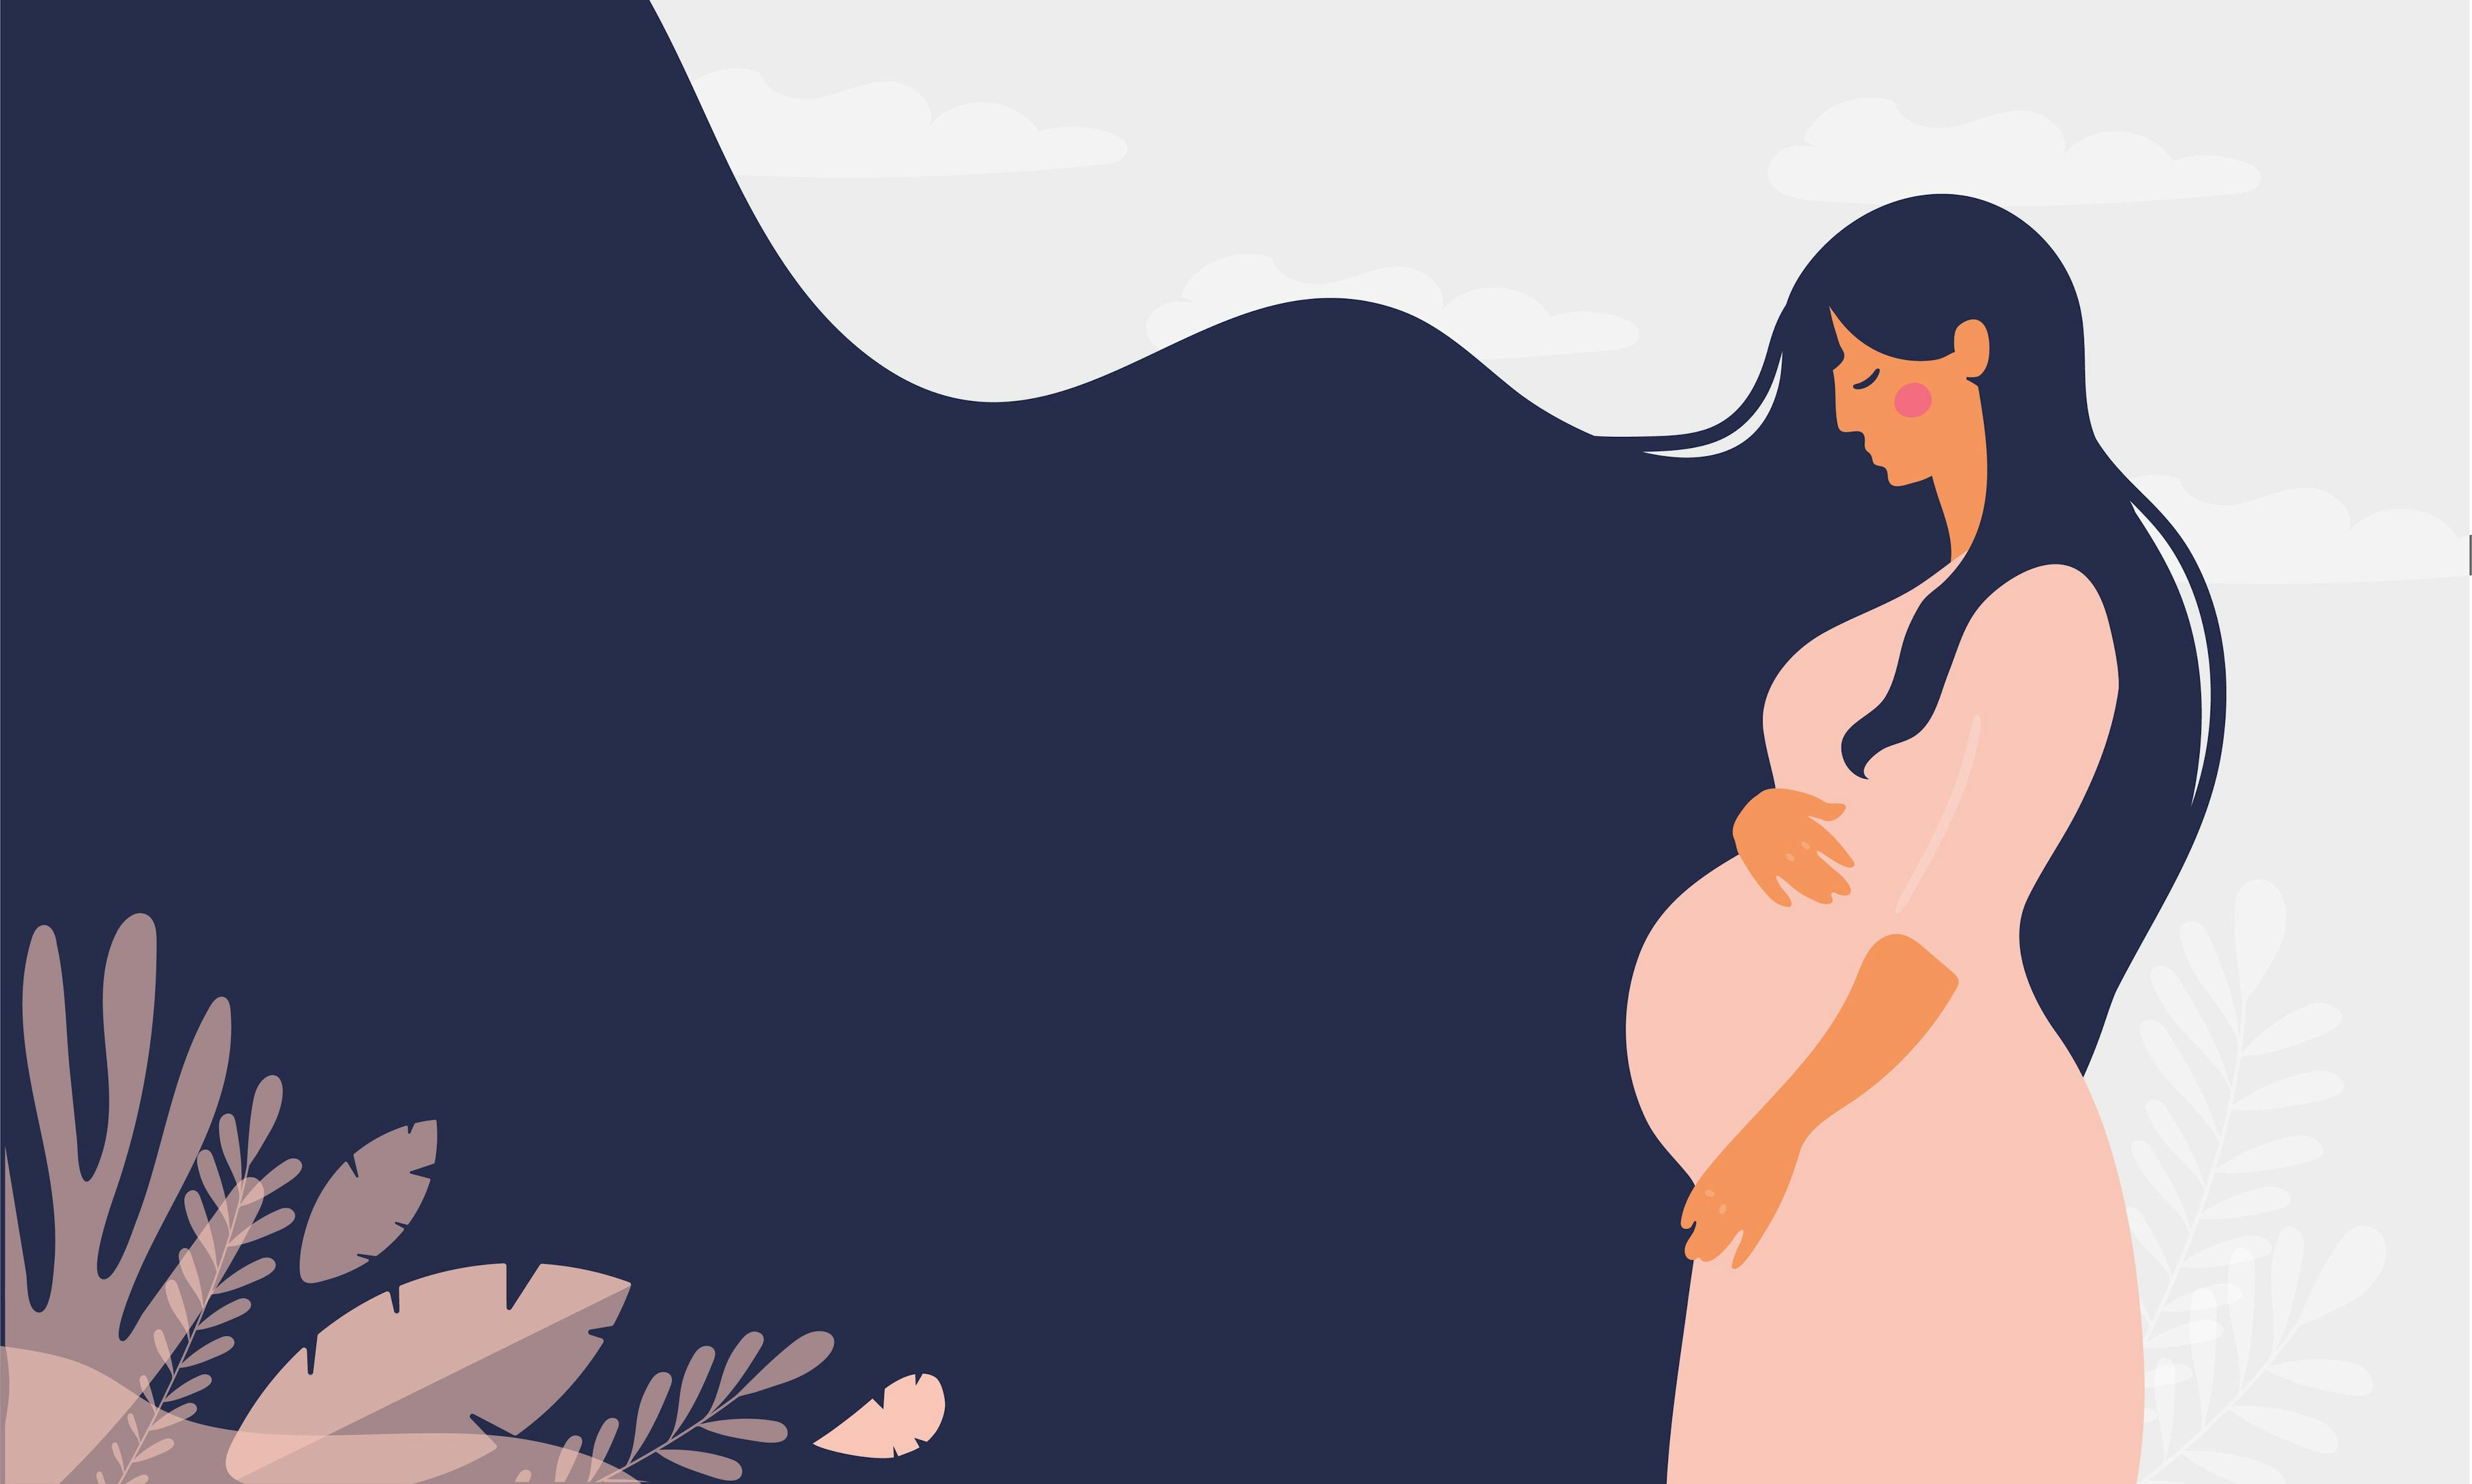 Pregnant Woman Animated | image credit: See Less - stock.adobe.com